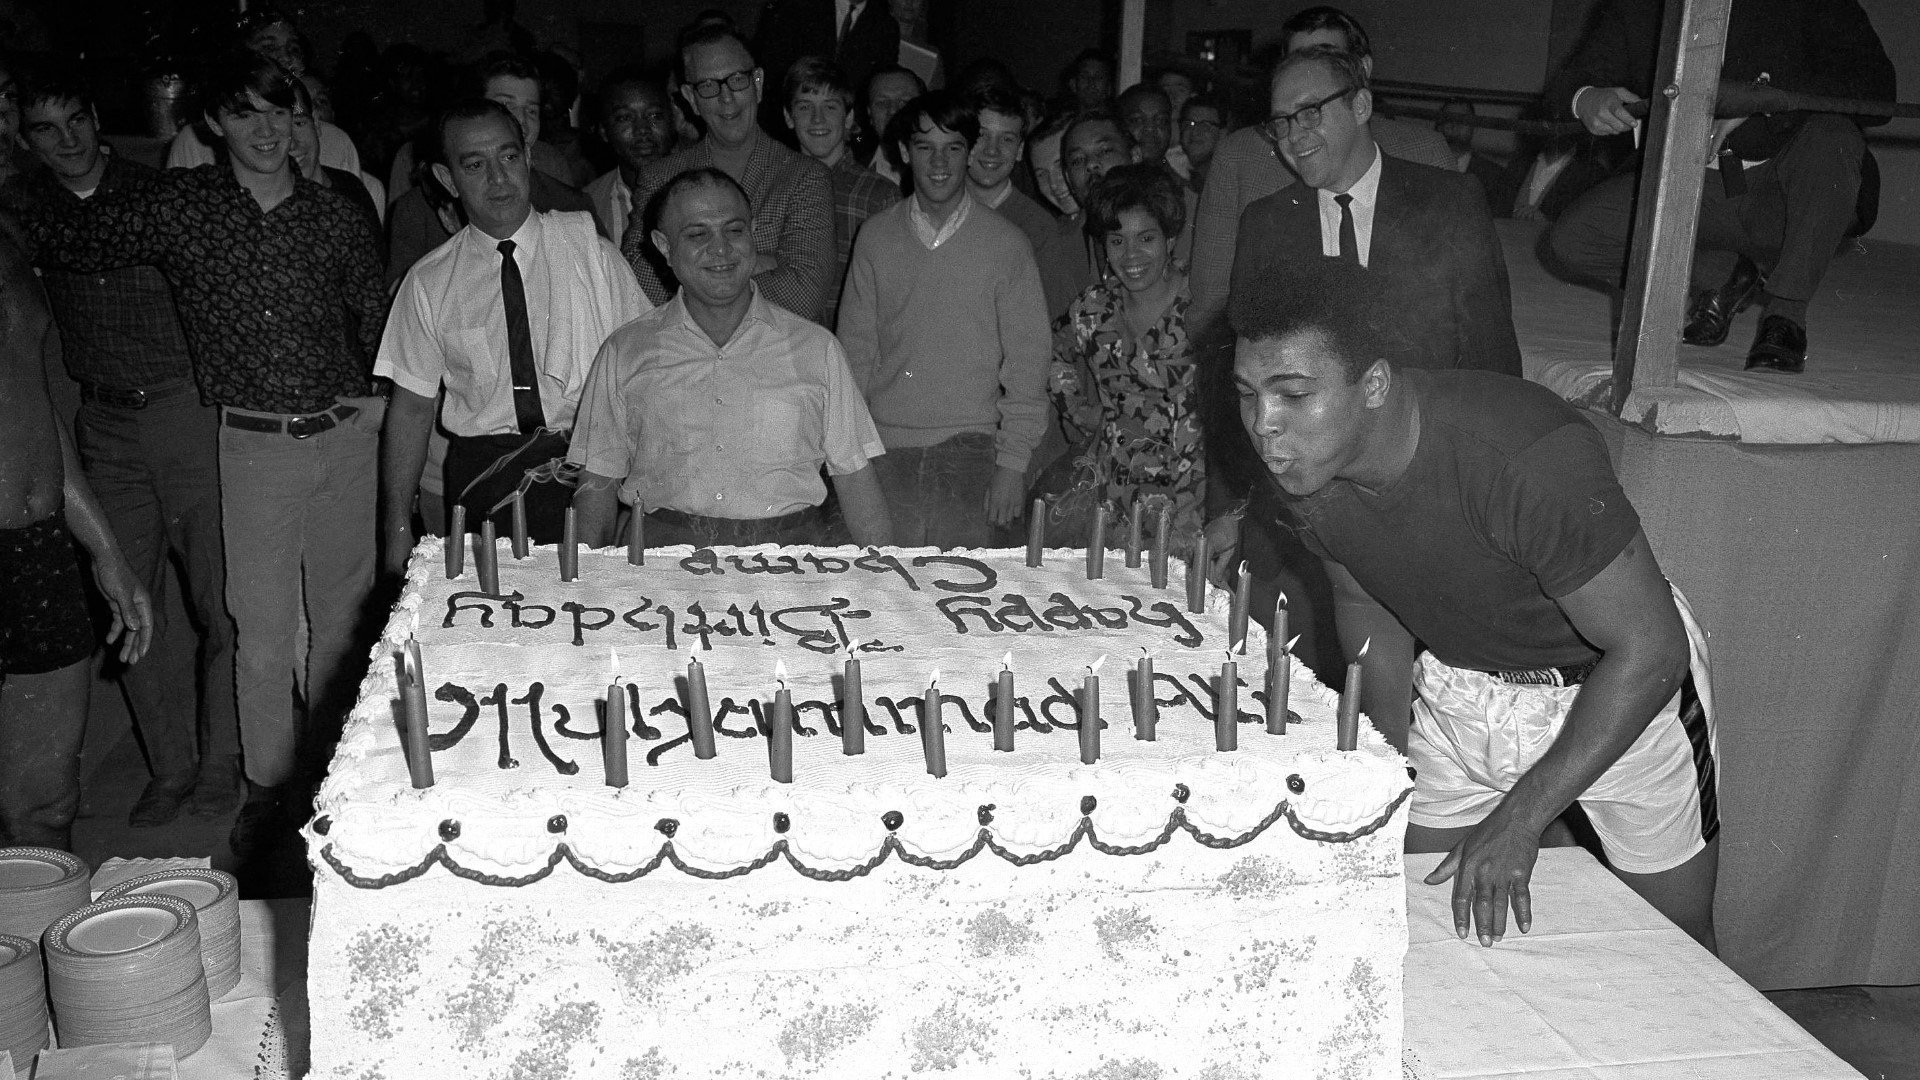 To celebrate the champ turning 25, officials from the Astrodome presented him with a 578-pound cake.